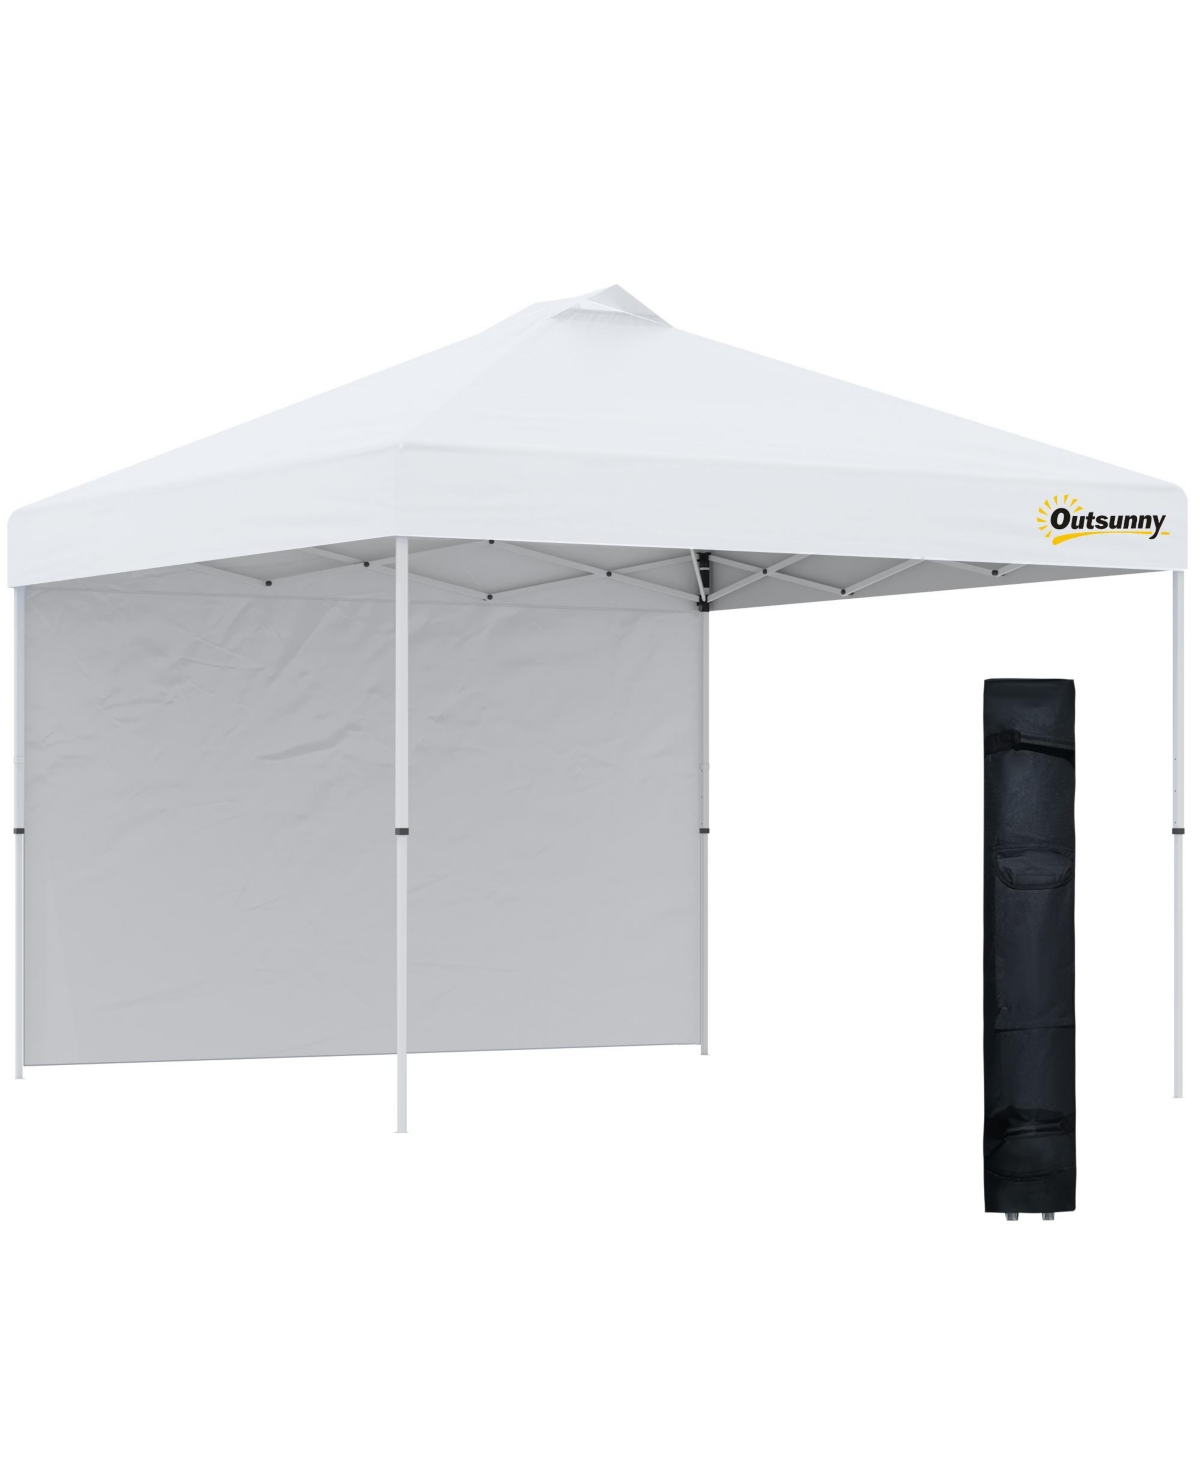 Outsunny 10' x 20' Carport, Portable Garage & Patio Canopy Tent, Adjustable  Height, Anti-UV Cover for Car, Truck, Boat, Catering, Wedding, Gray